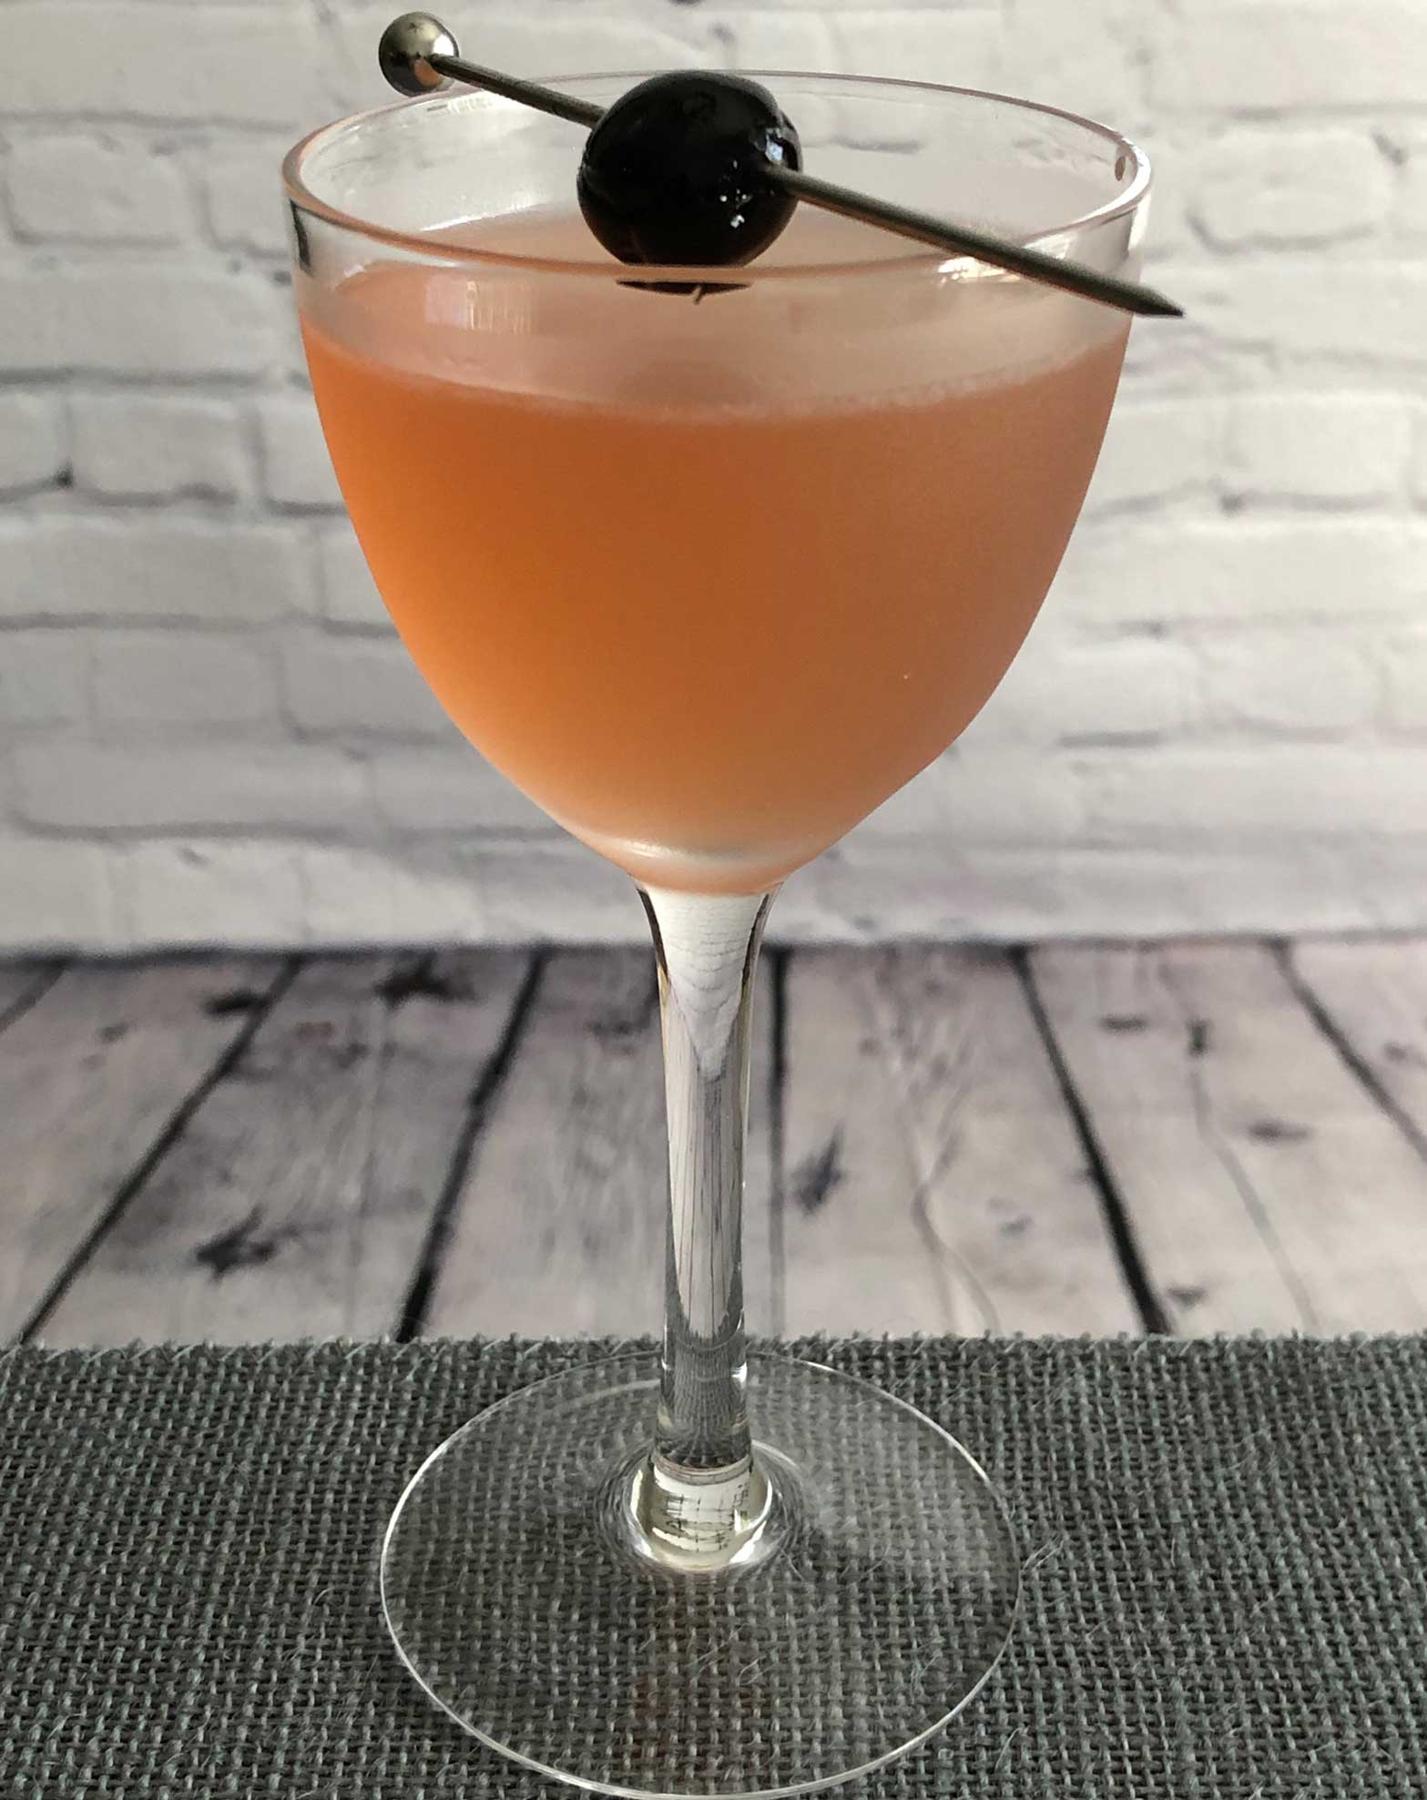 An example of the Her Alibi, the mixed drink (drink) featuring vodka, Rothman & Winter Orchard Cherry Liqueur, lime juice, orange-flavored liqueur, and maraschino cherry; photo by Lee Edwards